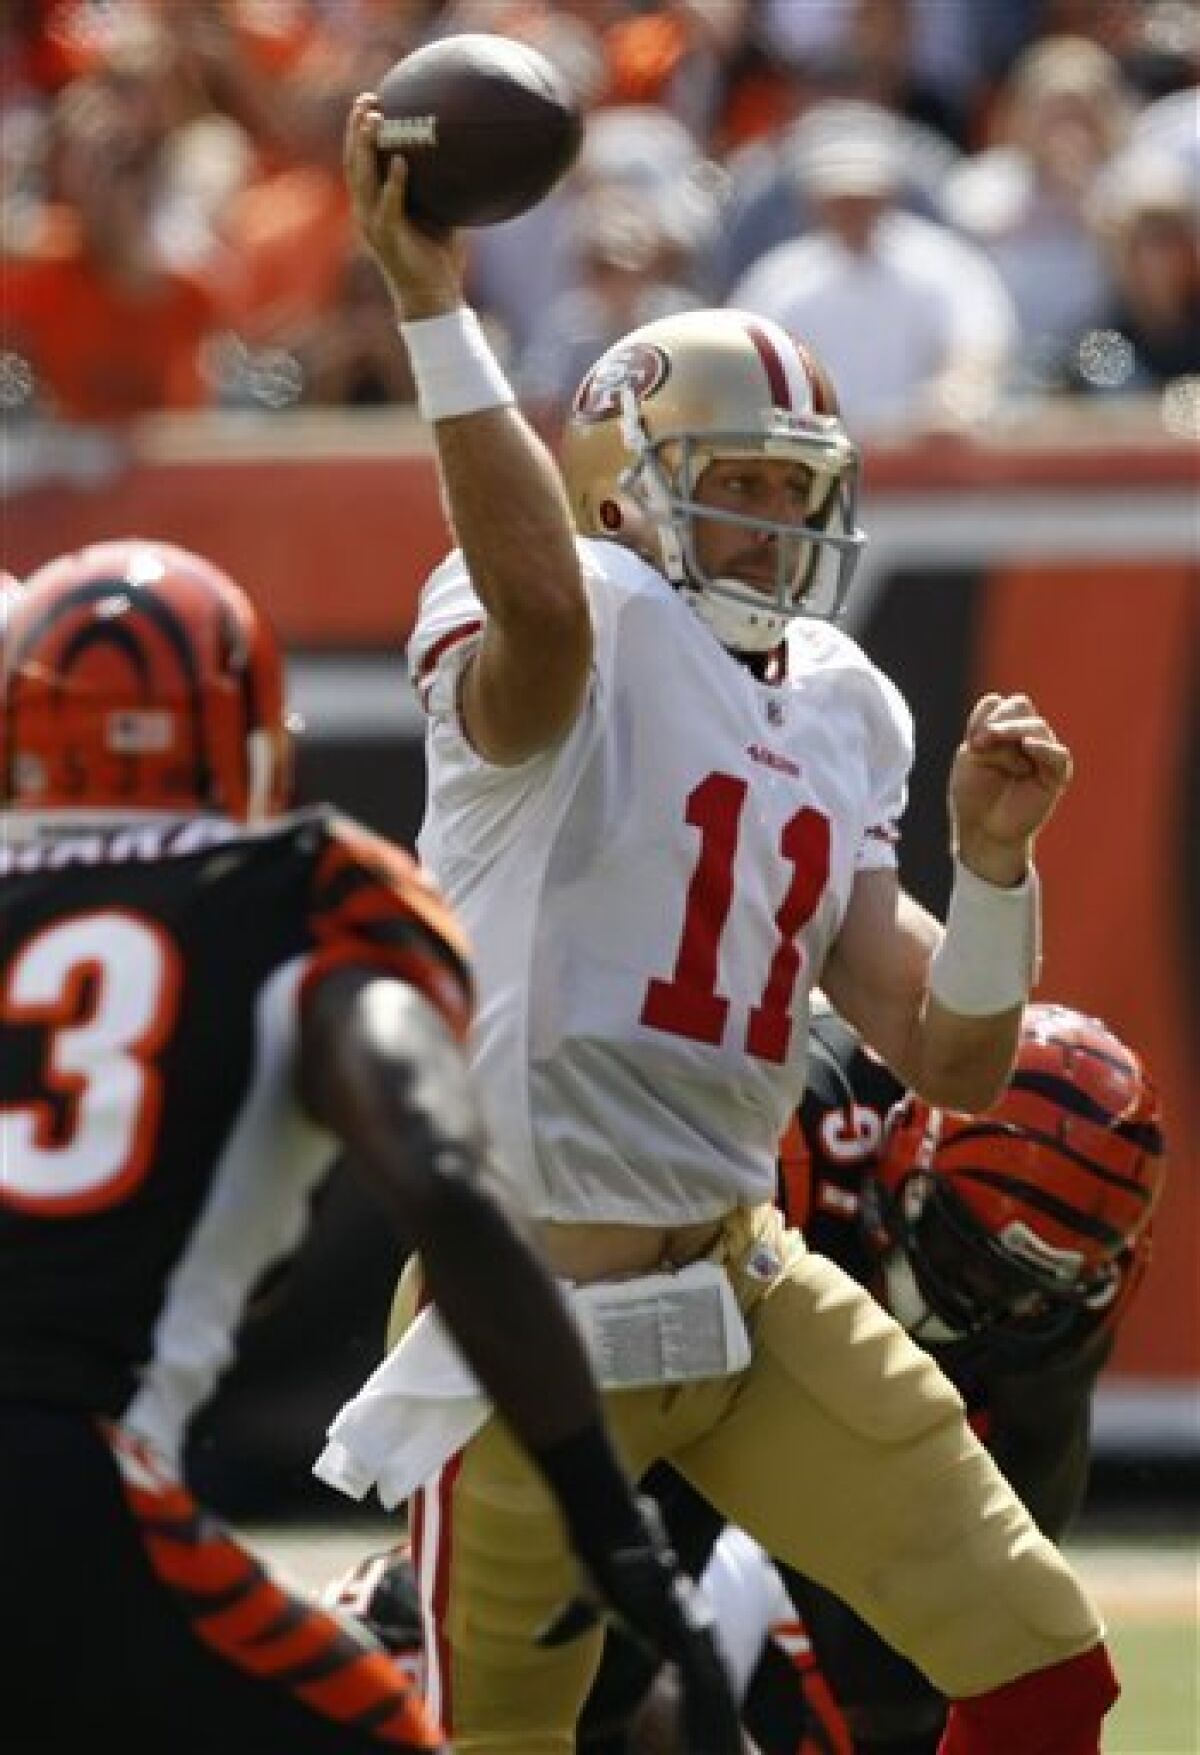 Hunter's TD rallies 49ers over Bengals 13-8 - The San Diego Union